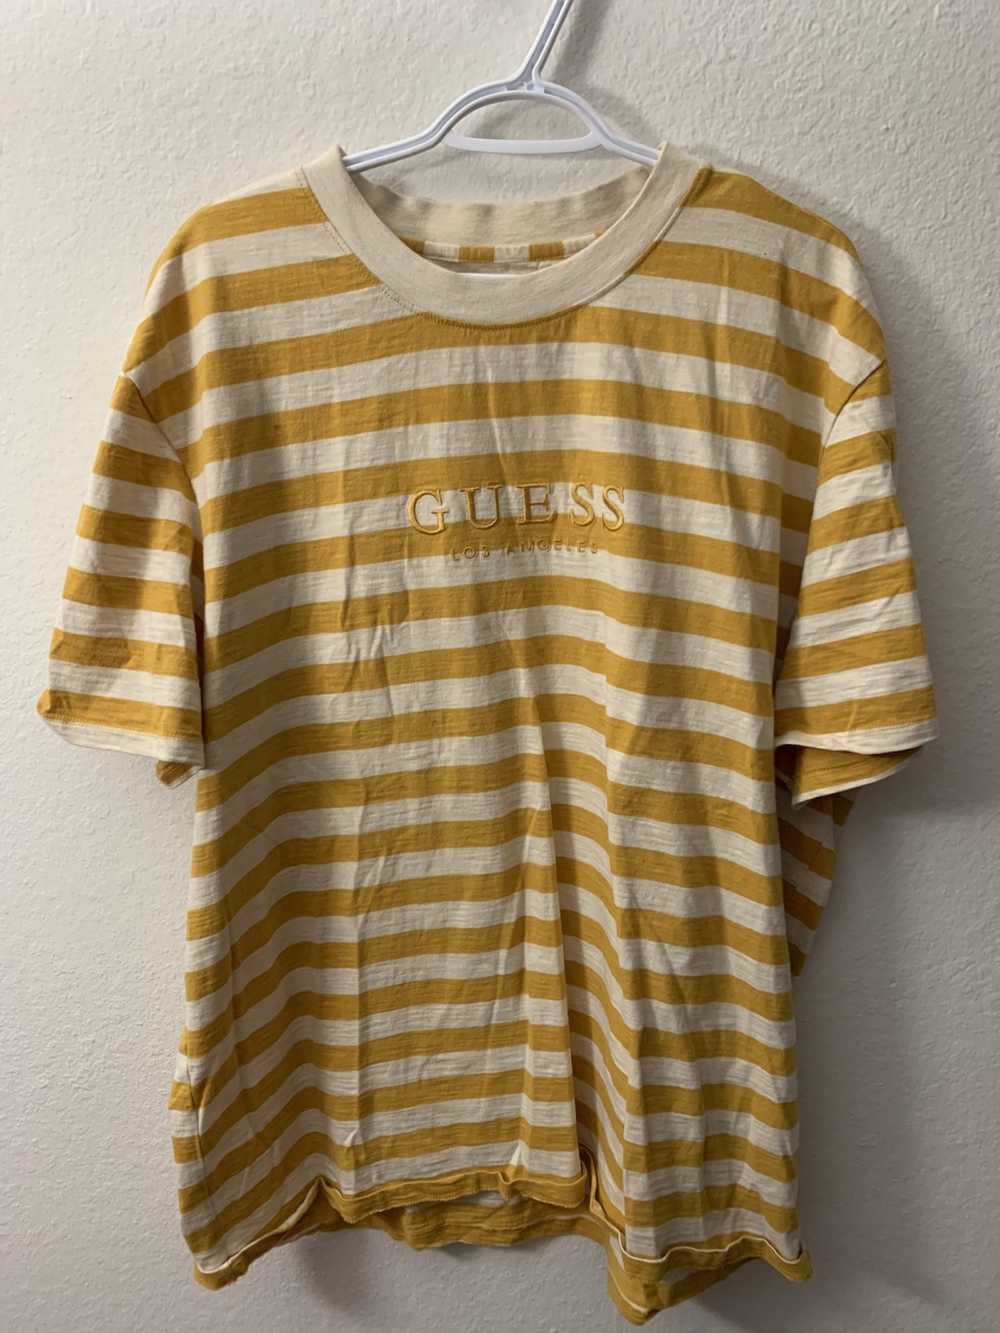 Guess Guess Los Angeles Yellow Striped Tee Shirt - image 1